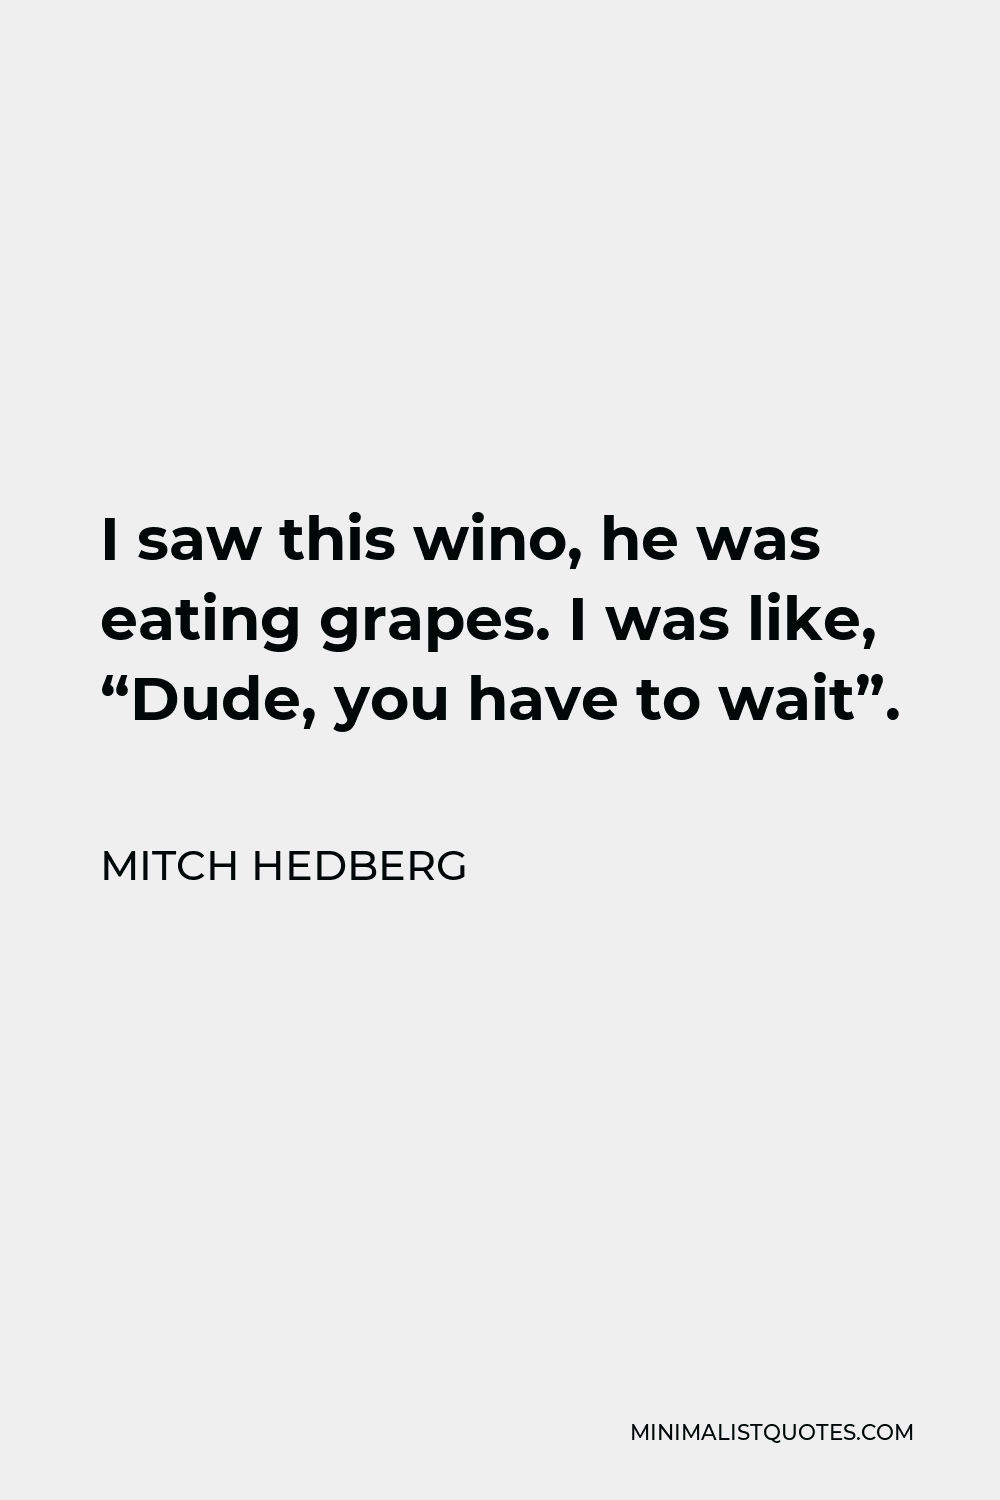 Mitch Hedberg Quote - I saw this wino, he was eating grapes. I was like, “Dude, you have to wait”.